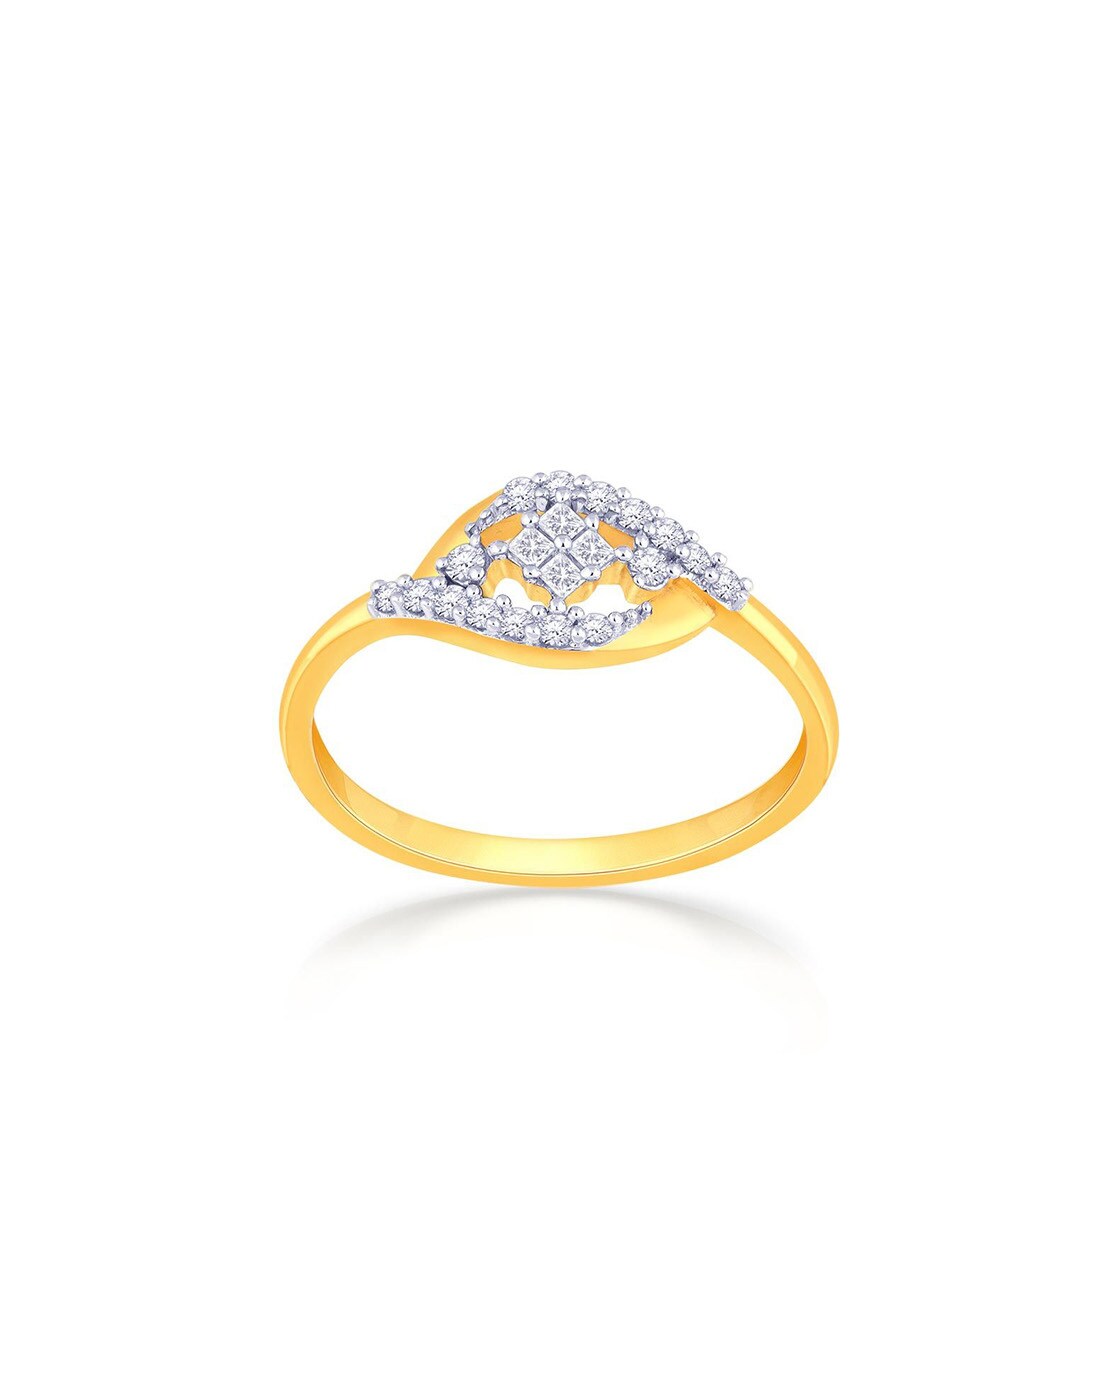 Buy Malabar Gold and Diamonds 18k Gold Ring for Women Online At Best Price  @ Tata CLiQ